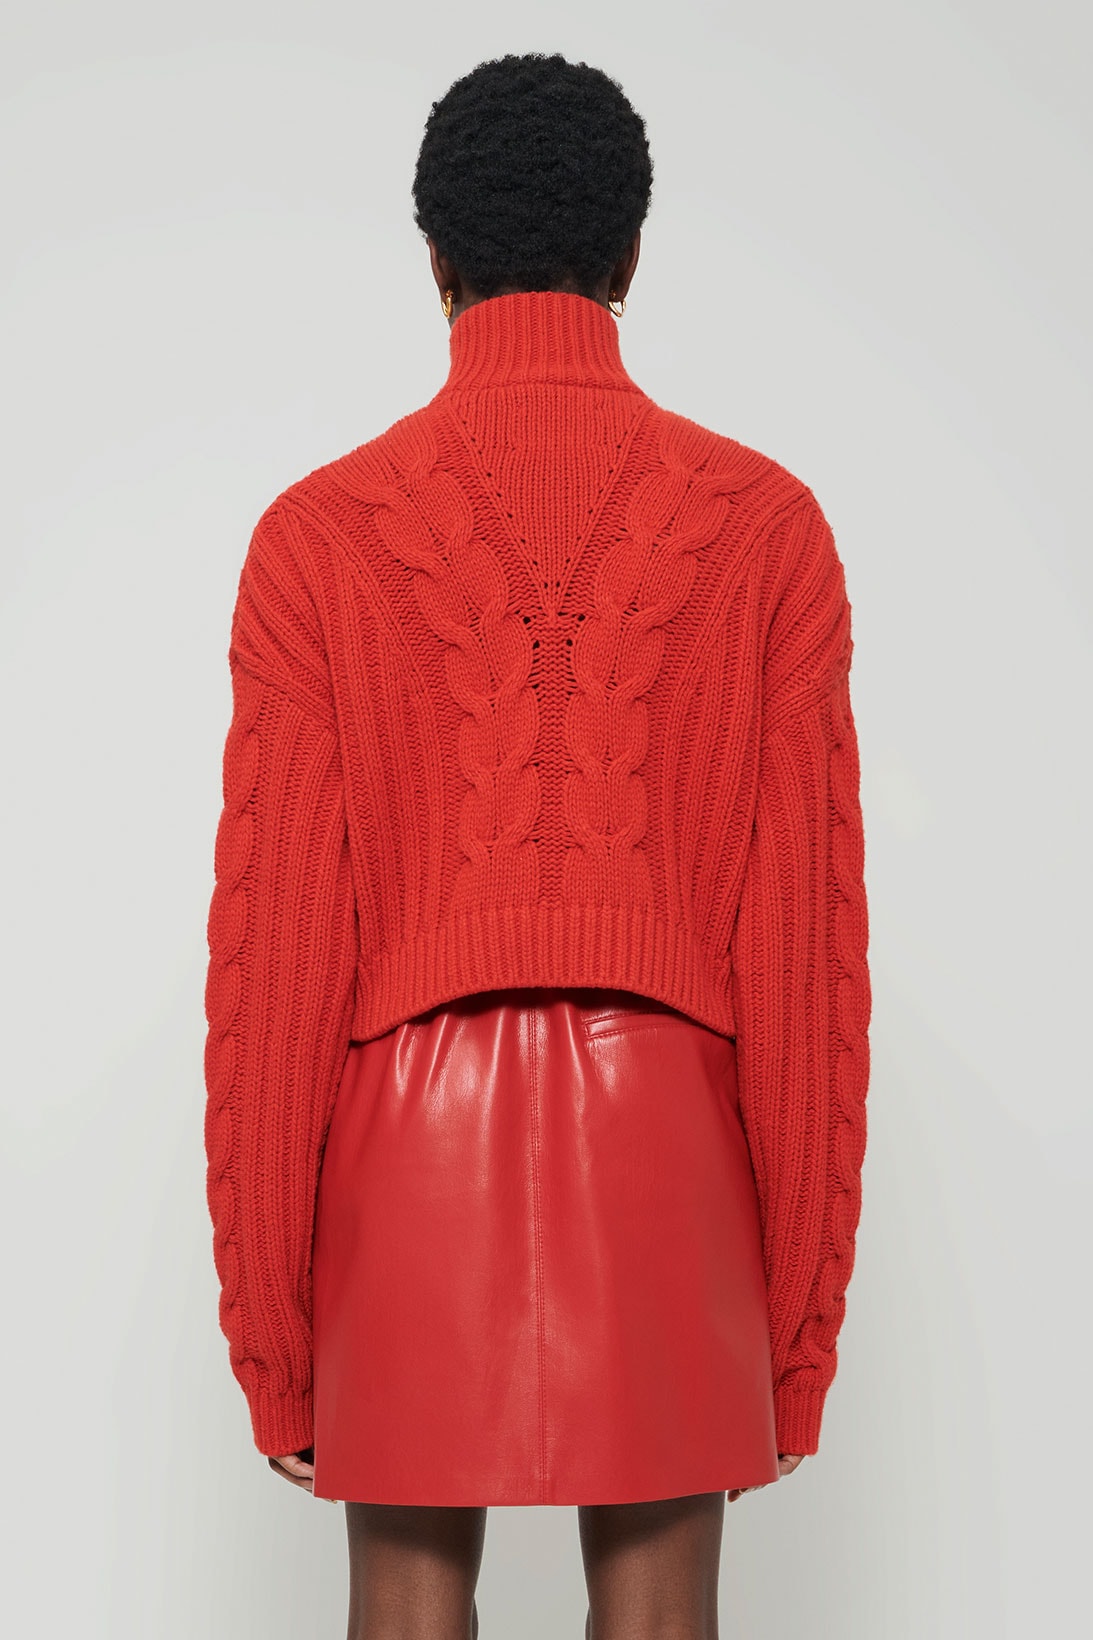 nanushka all-red chinese lunar new year collection chunky cable knitwear sweater vegan leather mini skirt